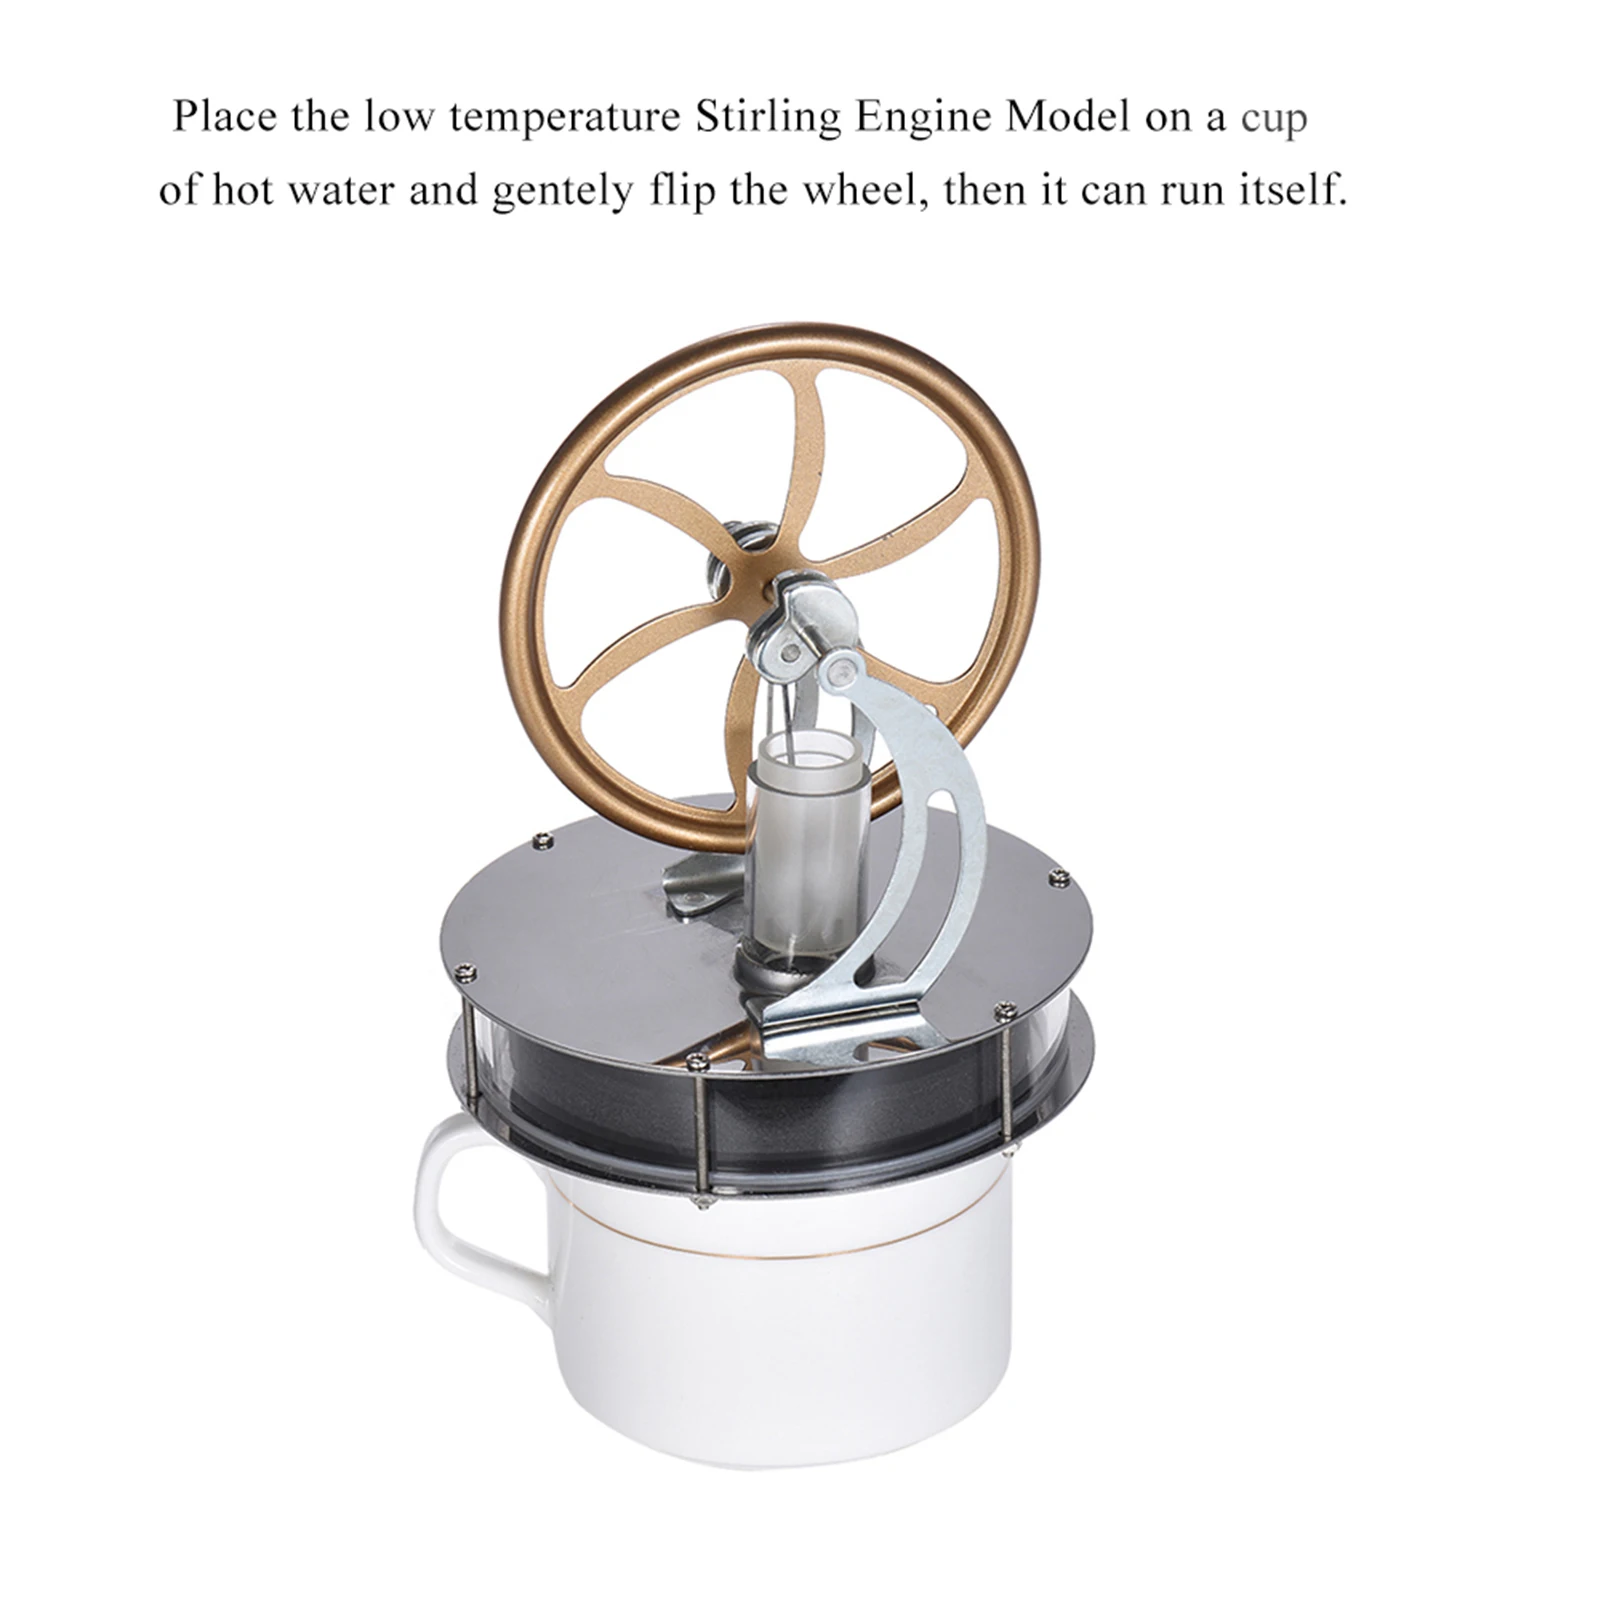 steam engines  Low Temperature Stirling Engine Motor Steam Heat Education Model Toy Kit